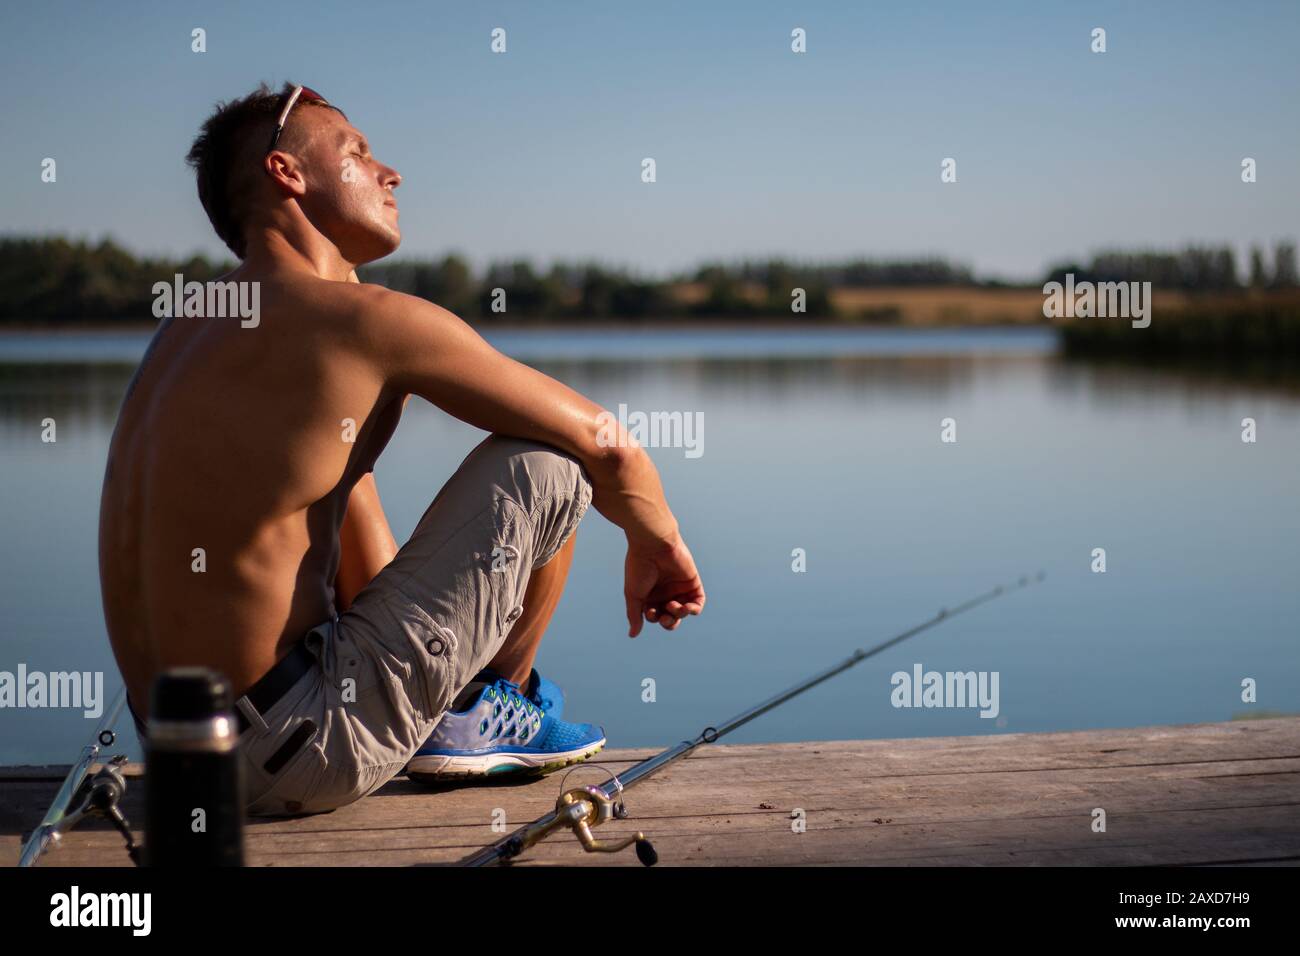 https://c8.alamy.com/comp/2AXD7H9/a-beautiful-man-with-a-bare-cake-with-a-fishing-rod-2AXD7H9.jpg